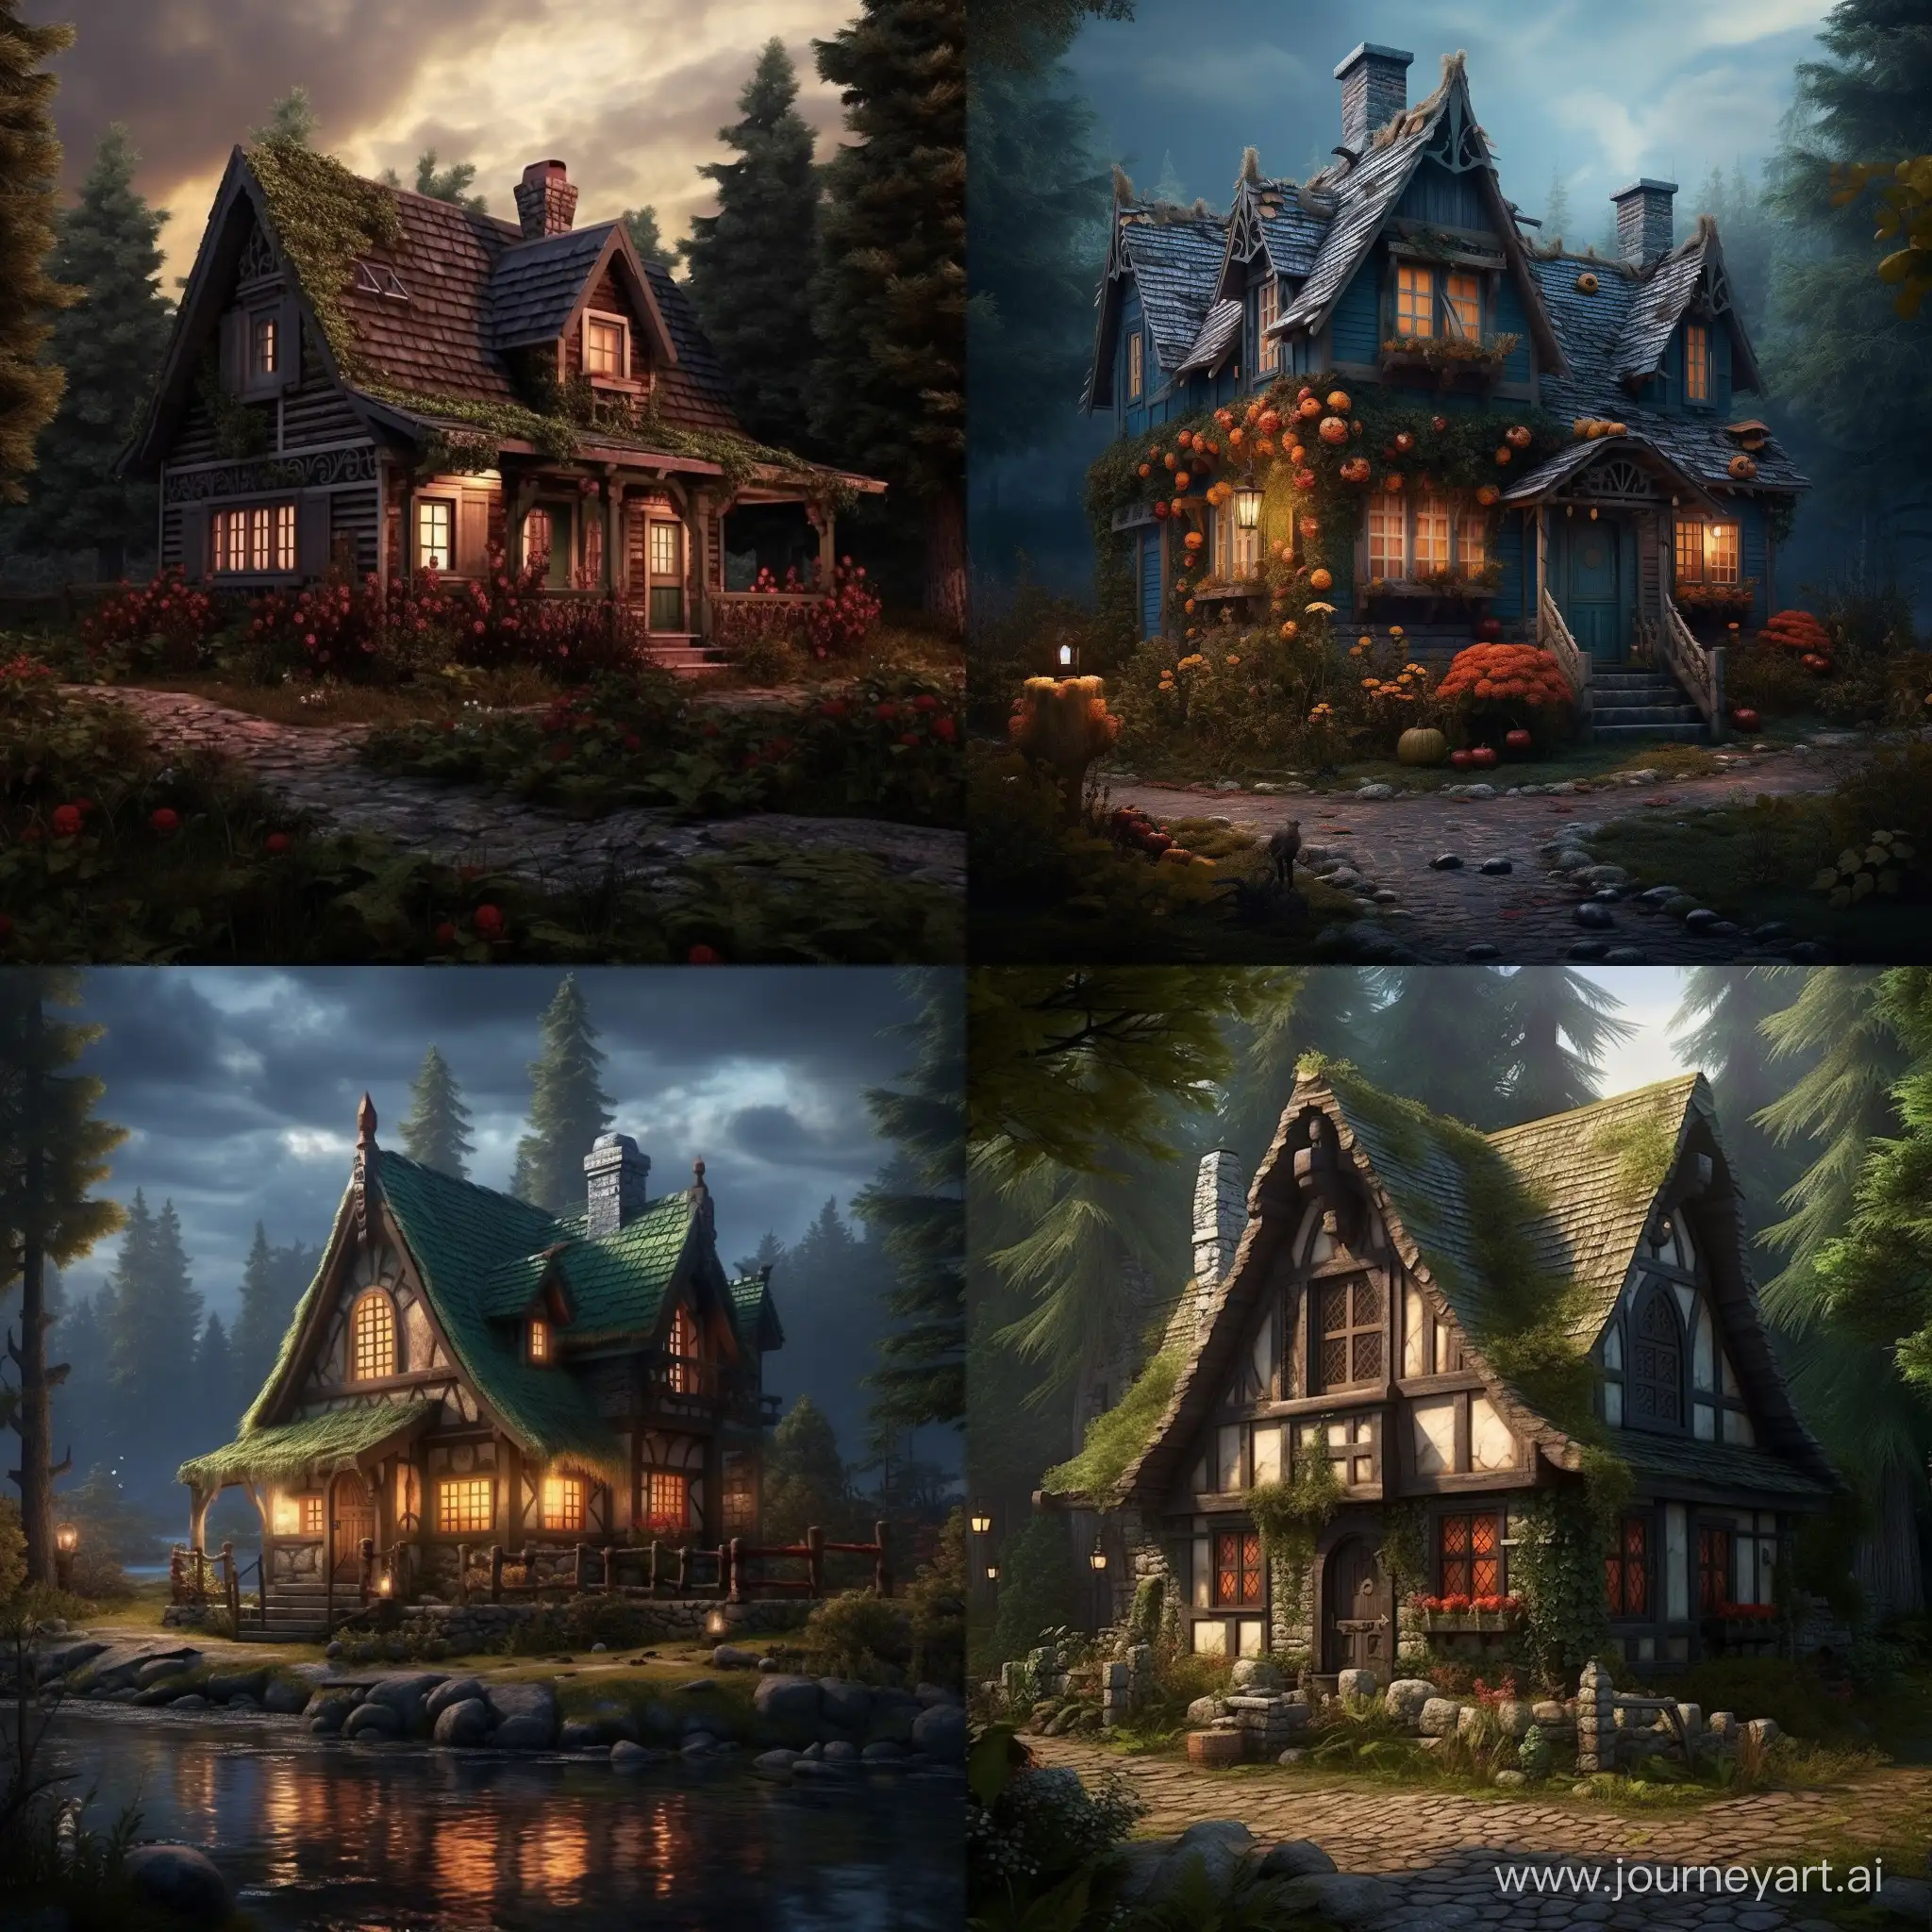 make a cottage for someone (seen from the outside) who is secretly plotting revenge - their cottage is cool but they are up to something evil inside. 